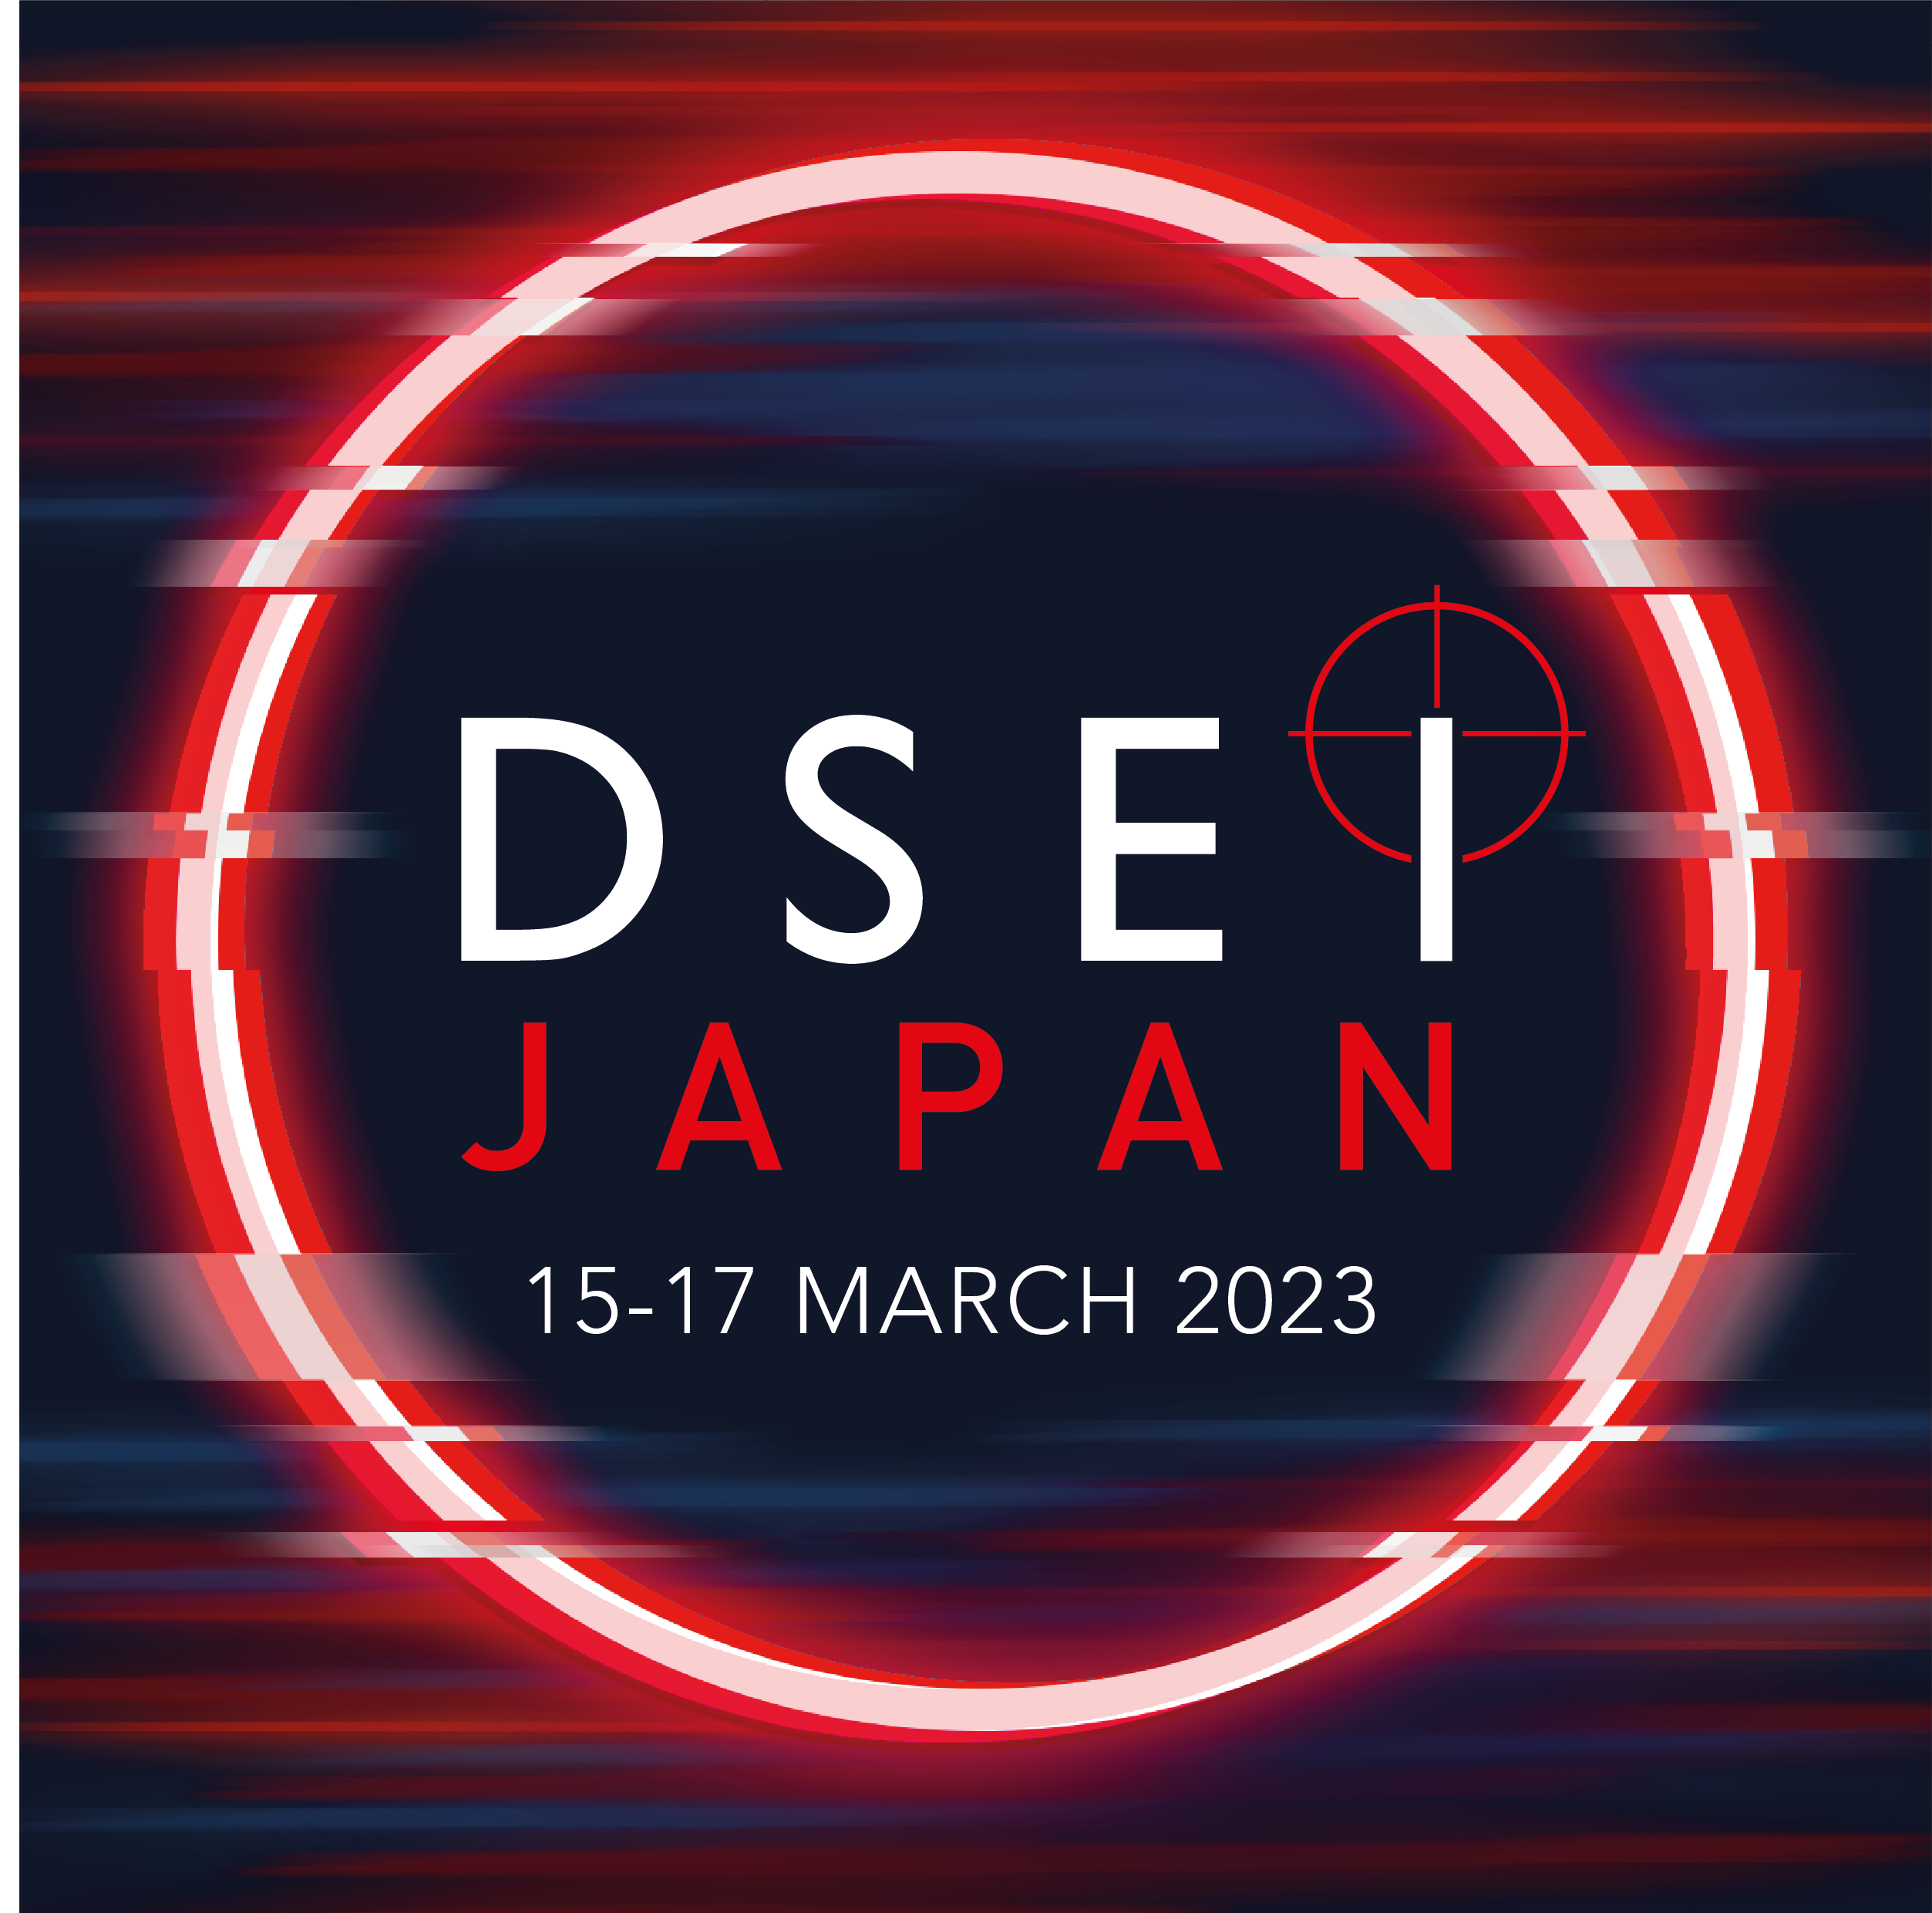 ANNOUNCEMENT: New 2023 Dates for DSEI Japan